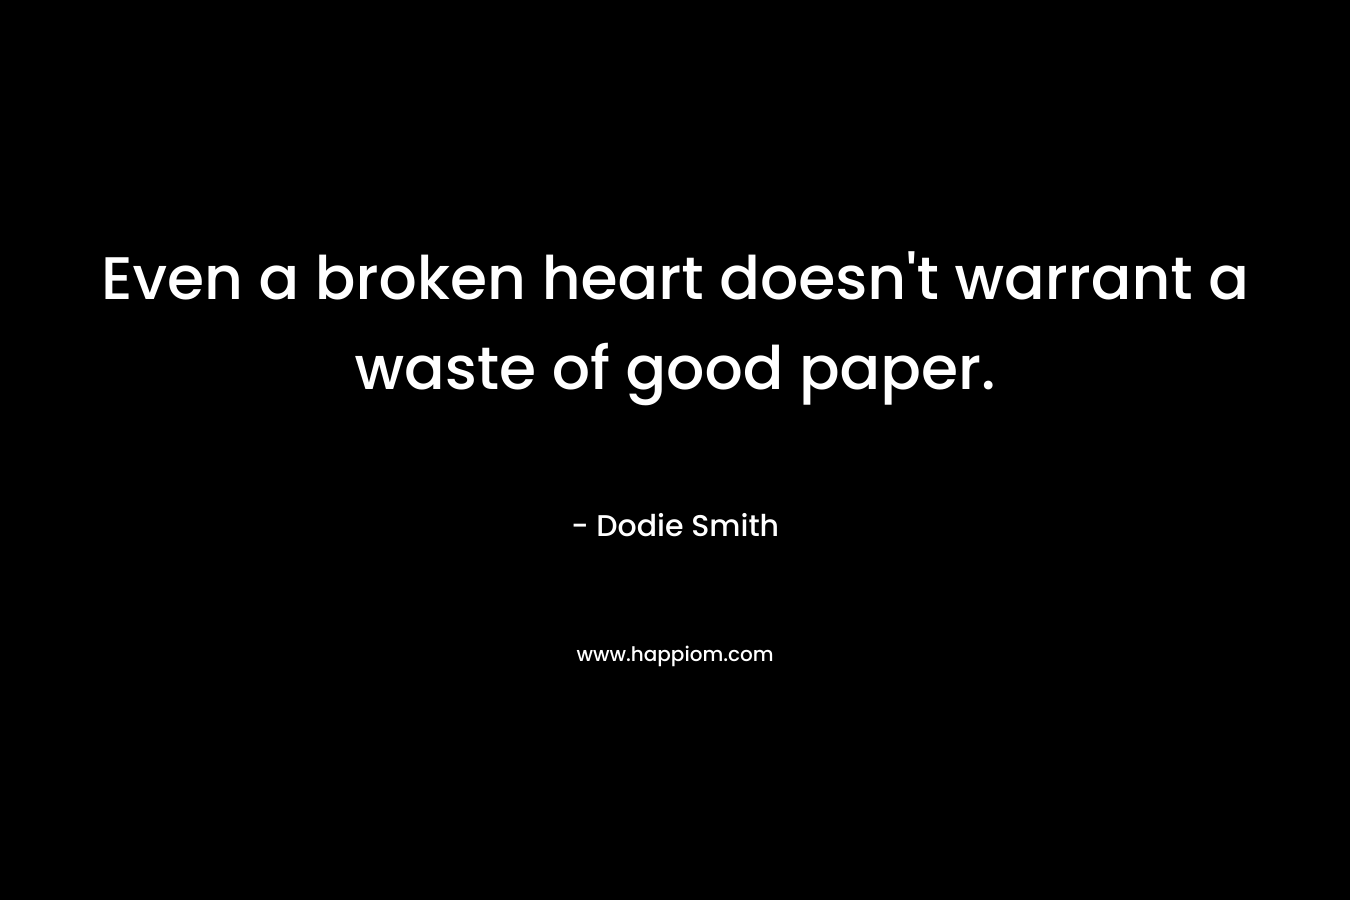 Even a broken heart doesn't warrant a waste of good paper.